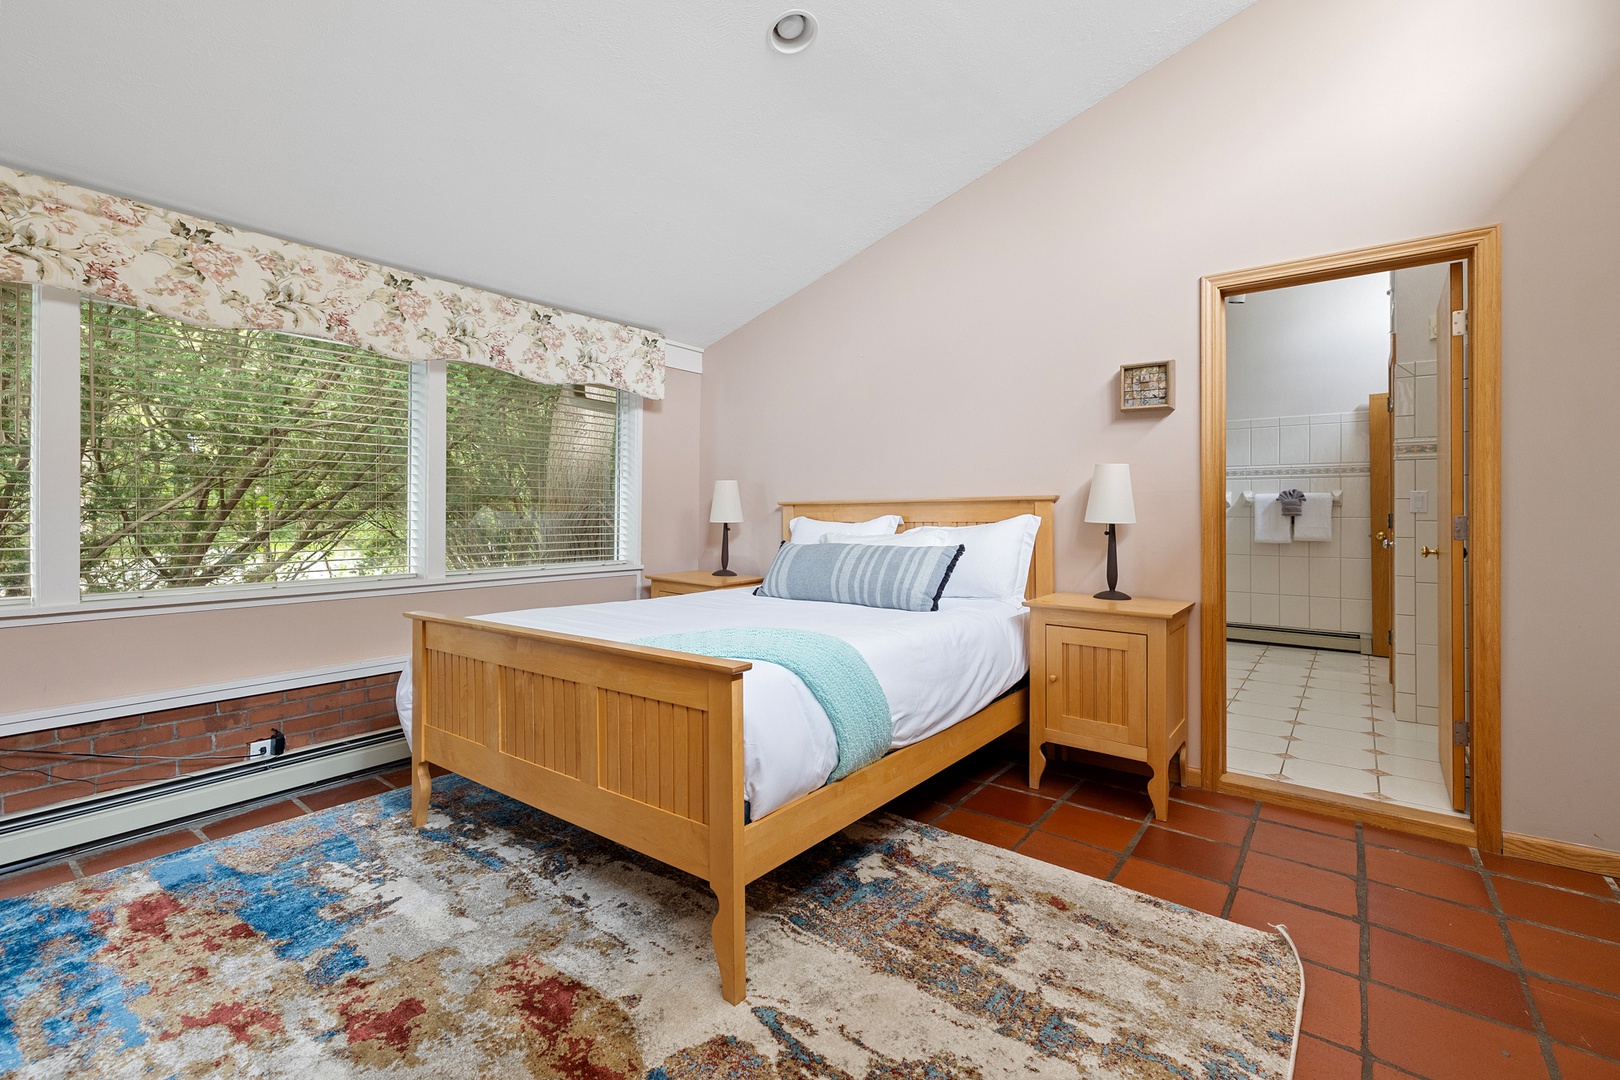 The spacious primary bedroom features a comfortably queen bed and ensuite bathroom.